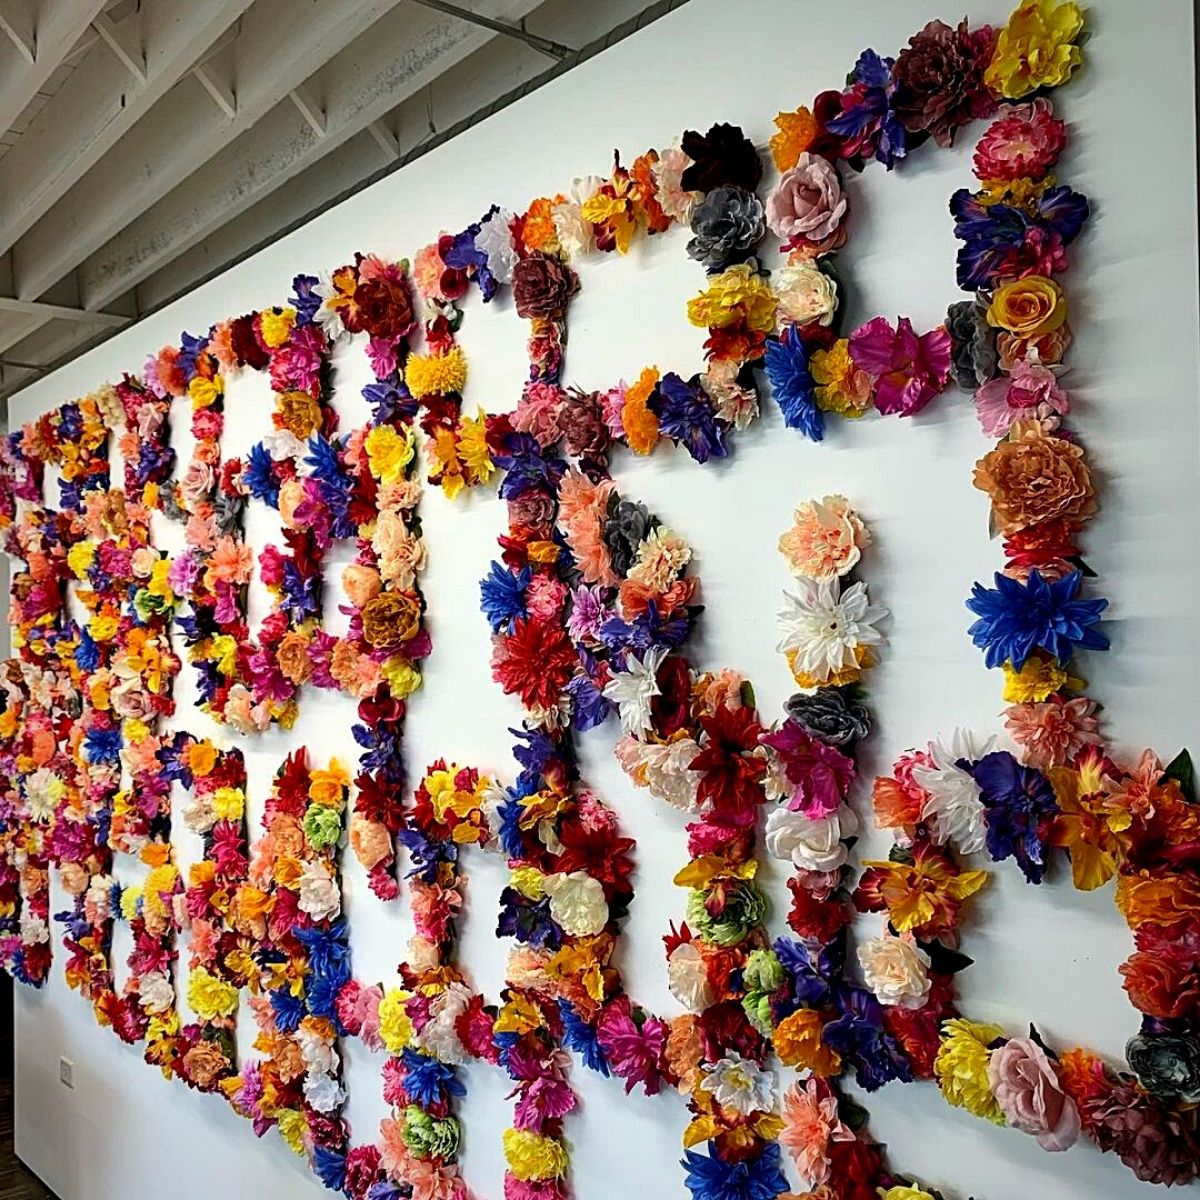 Floral arrangement by Nick Cave on a wall at Facility Chicago